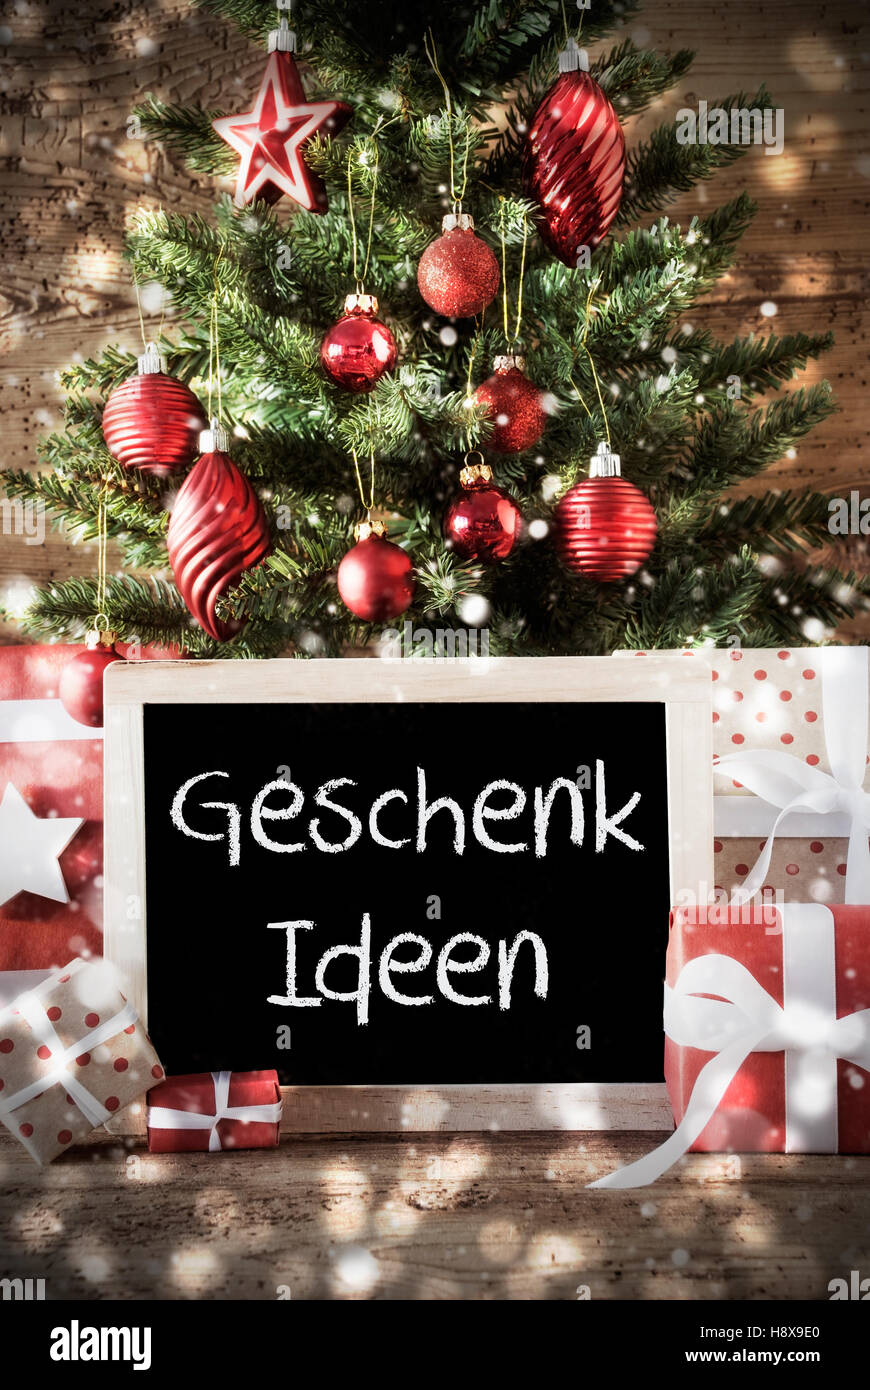 Christmas Tree With Geschenk Ideen Means Gift Ideas Stock Photo